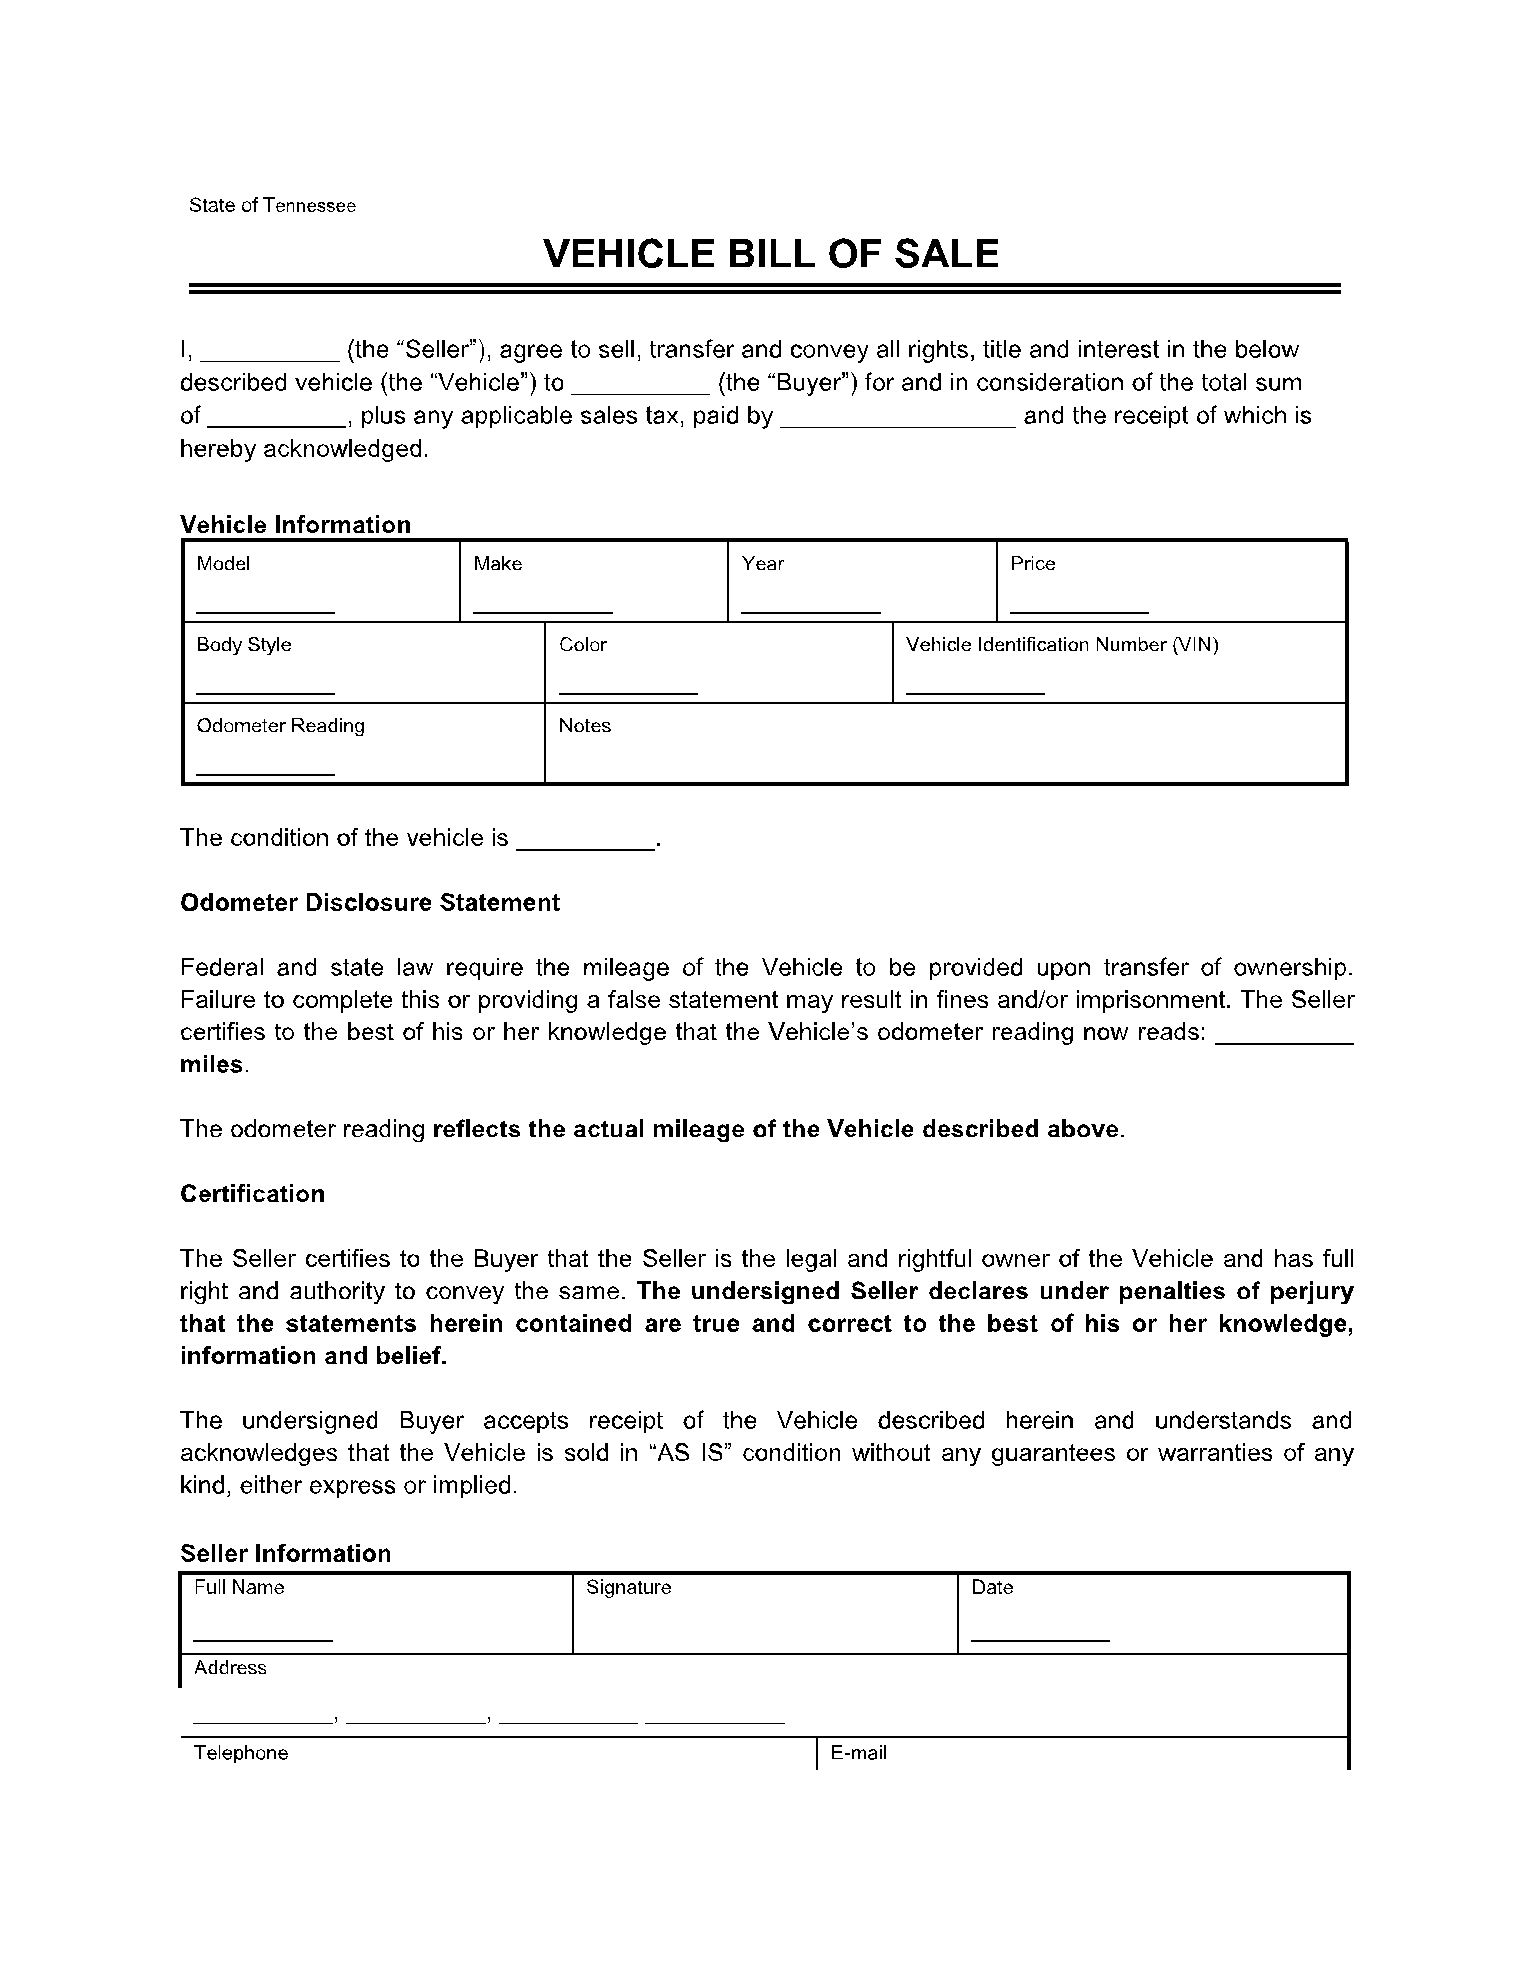 Vehicle Bill of Sale Tennessee Forms